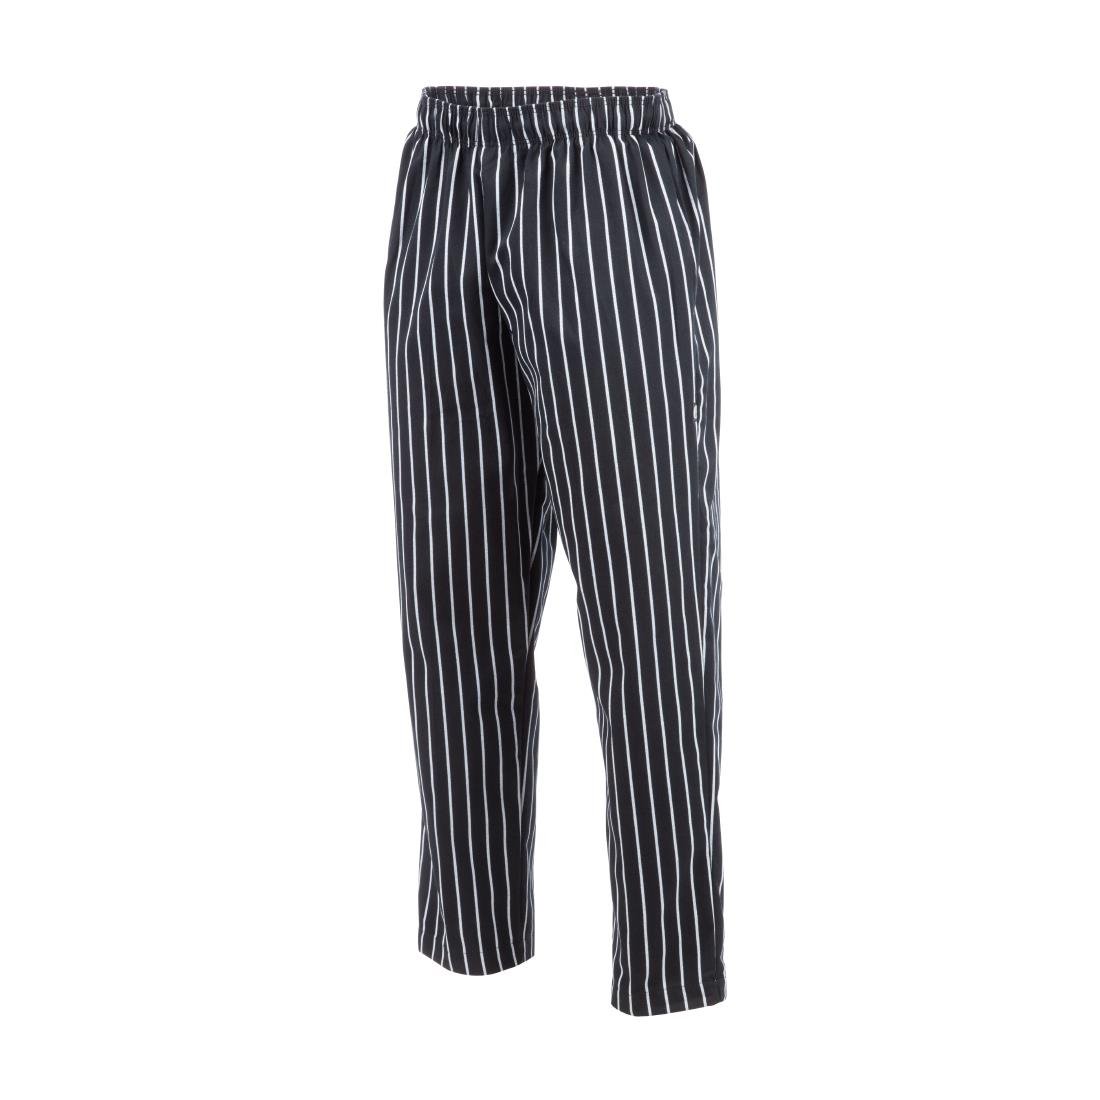 A940-XL Chef Works Designer Baggy Pant Chalk Stripe XL JD Catering Equipment Solutions Ltd